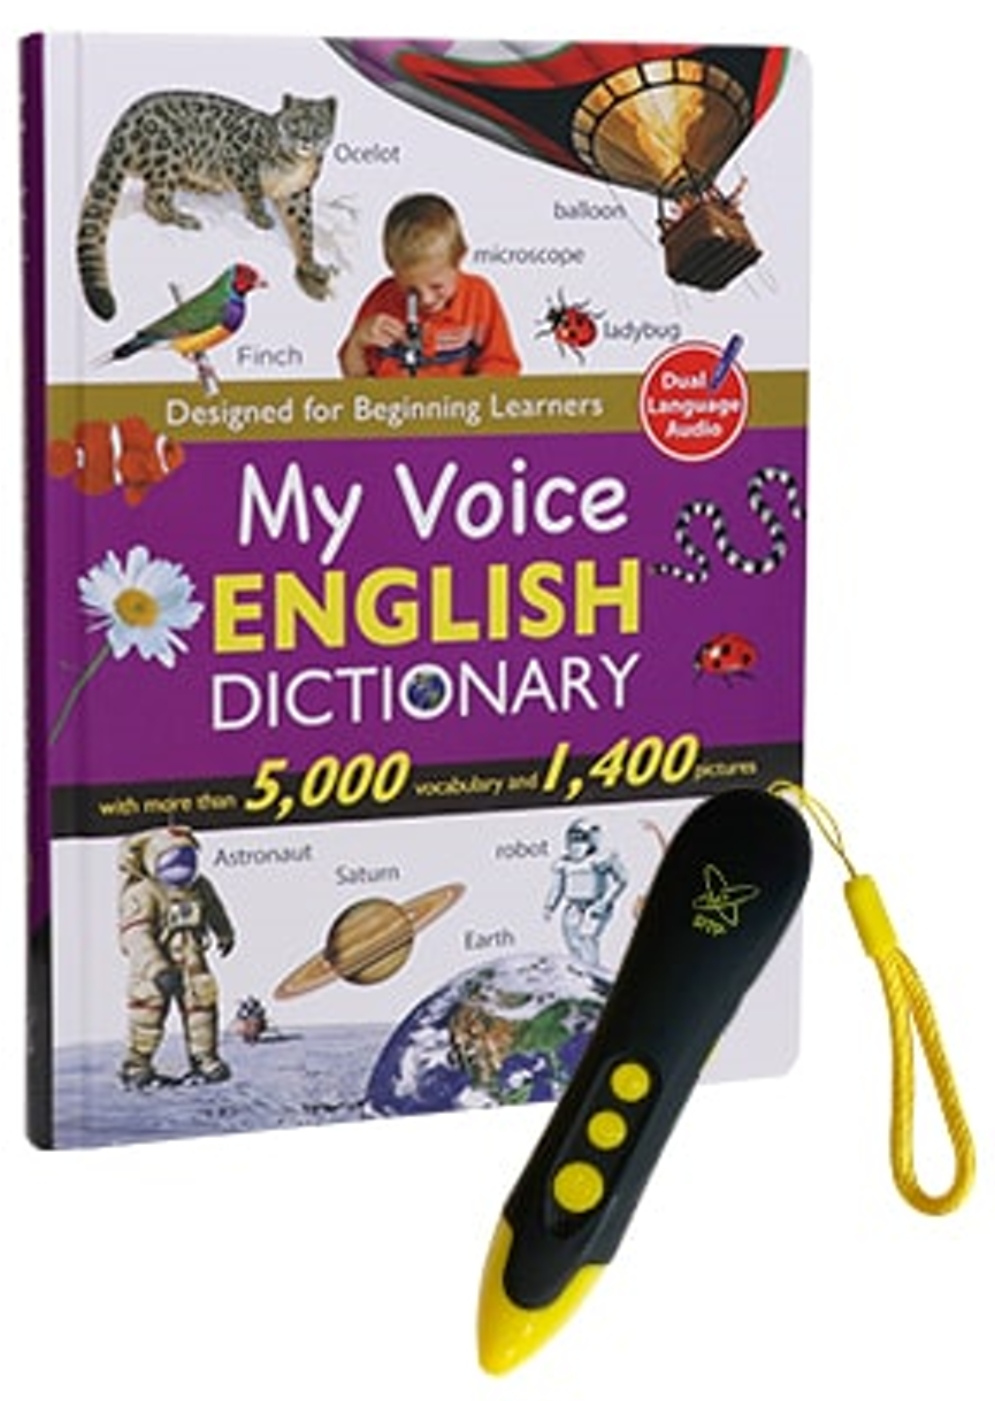 My Voice English Dictionary DT...